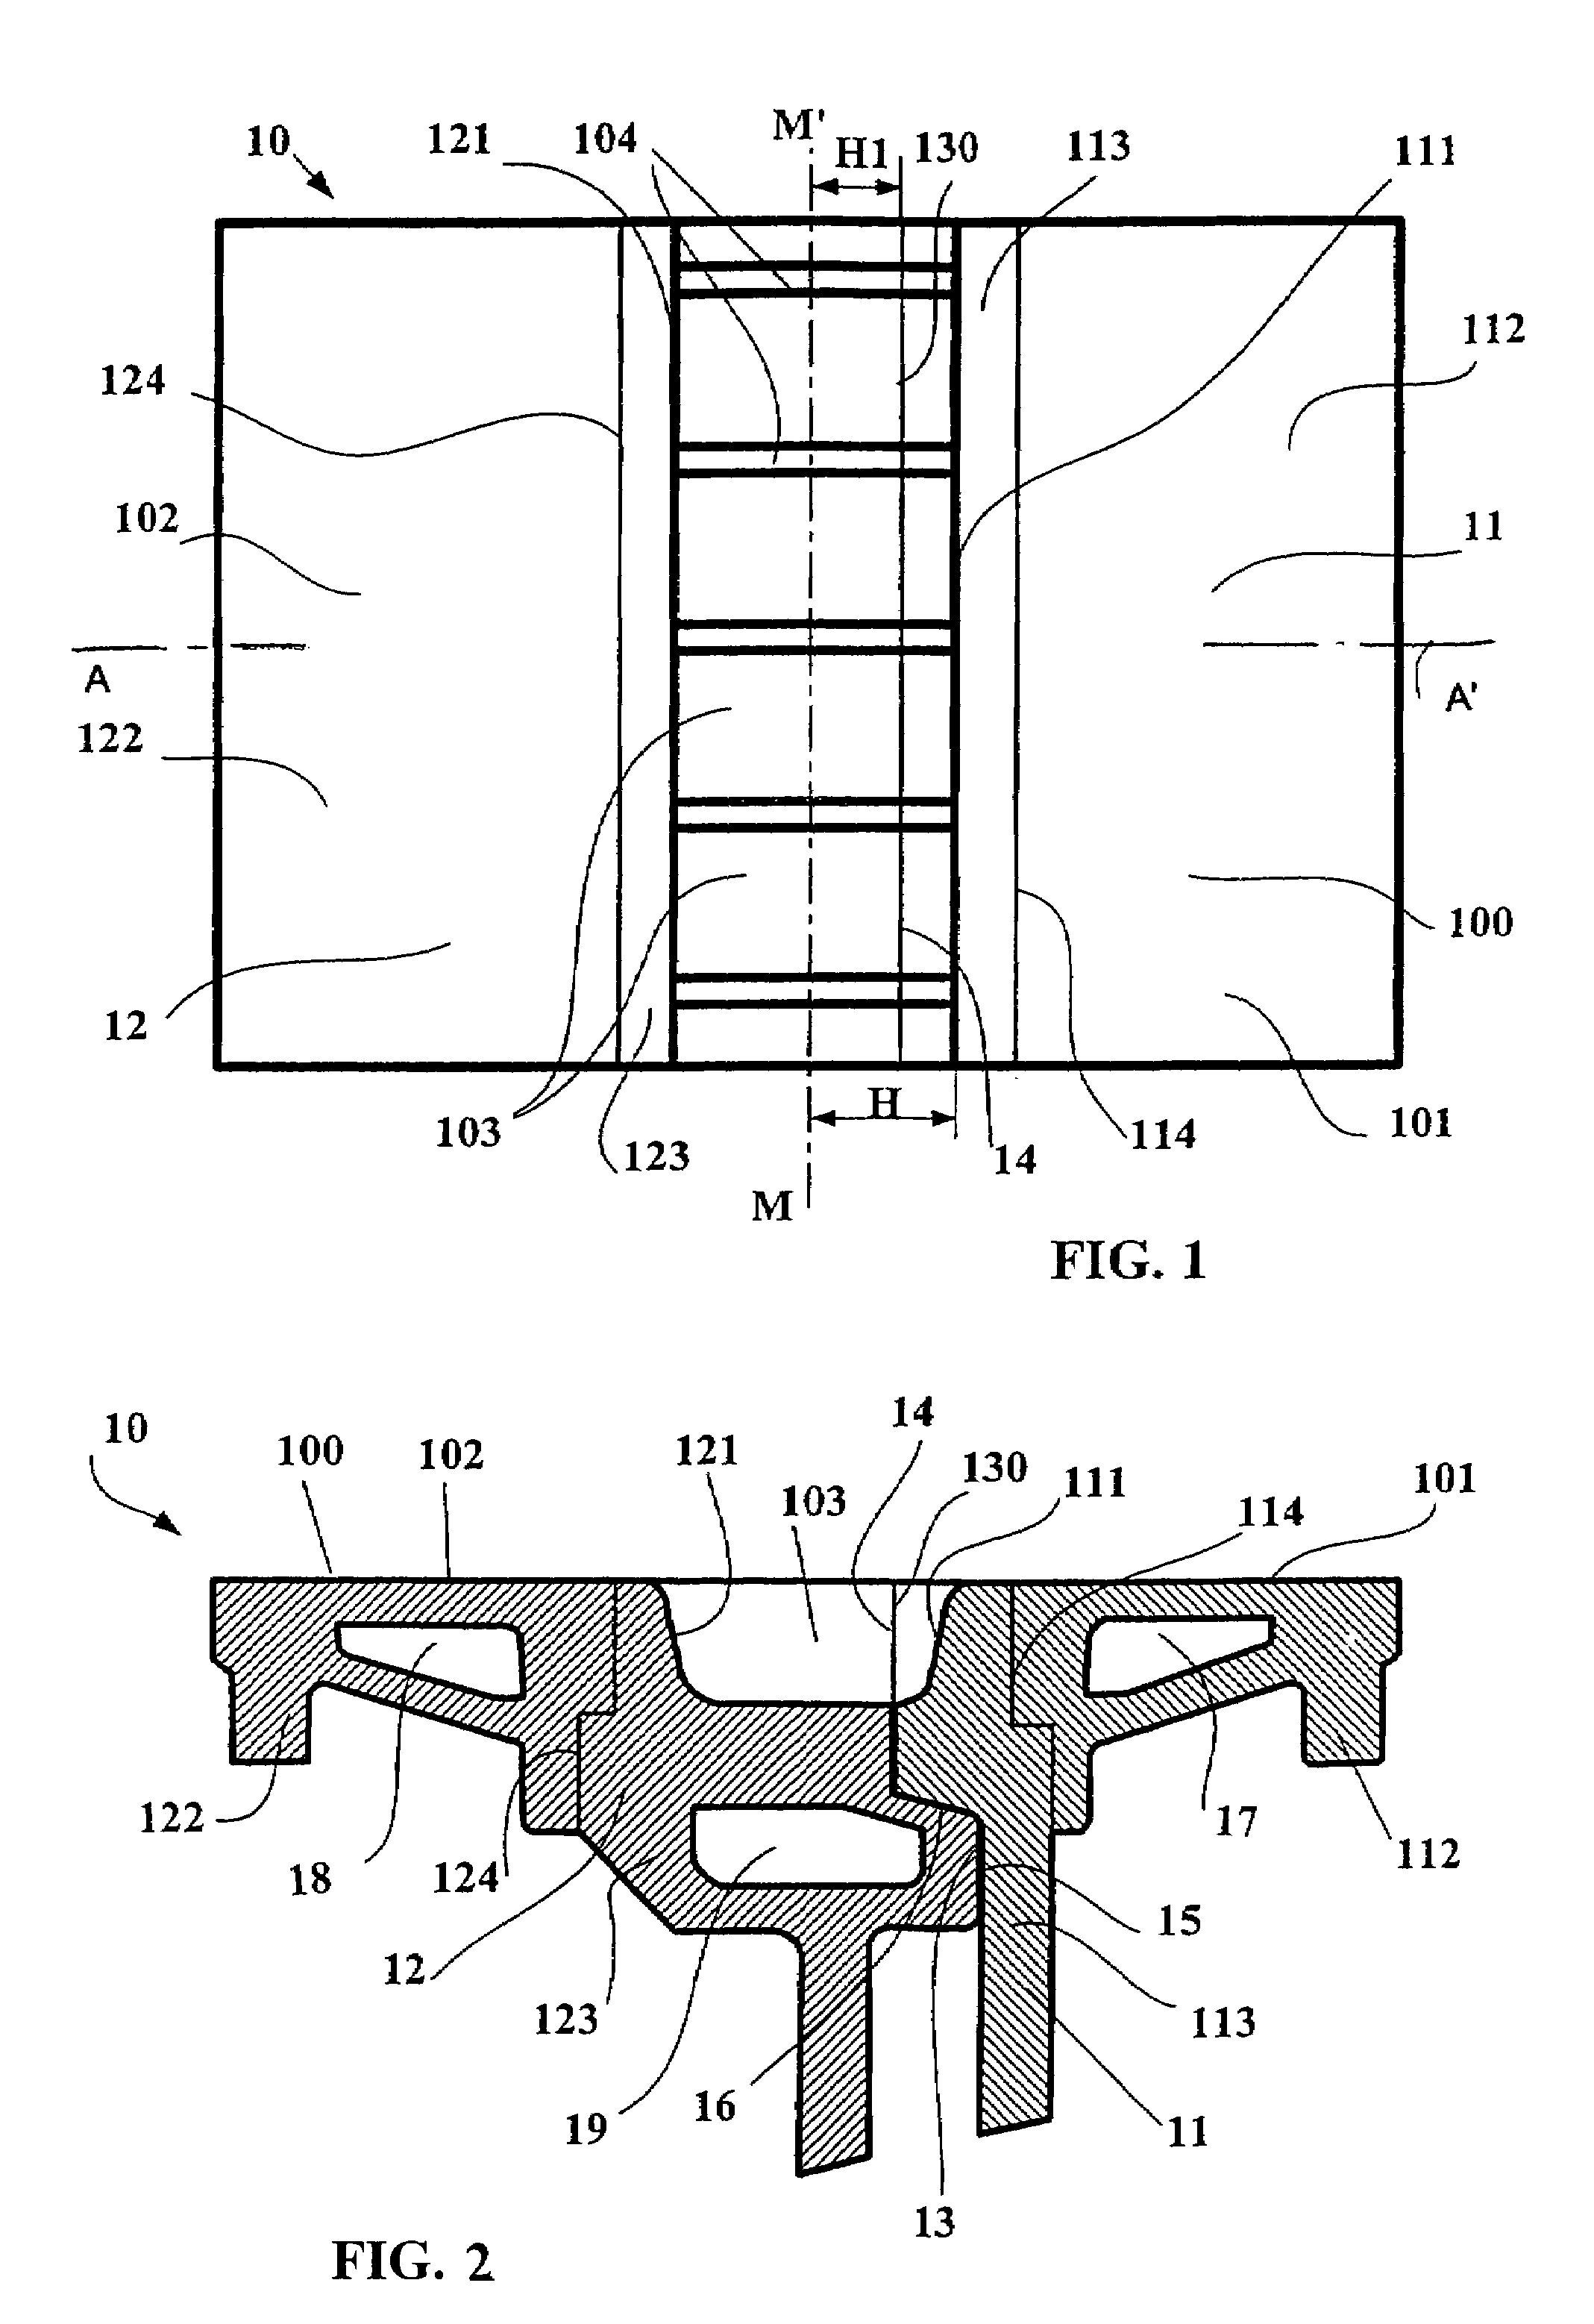 Process for manufacturing a track and stripping device